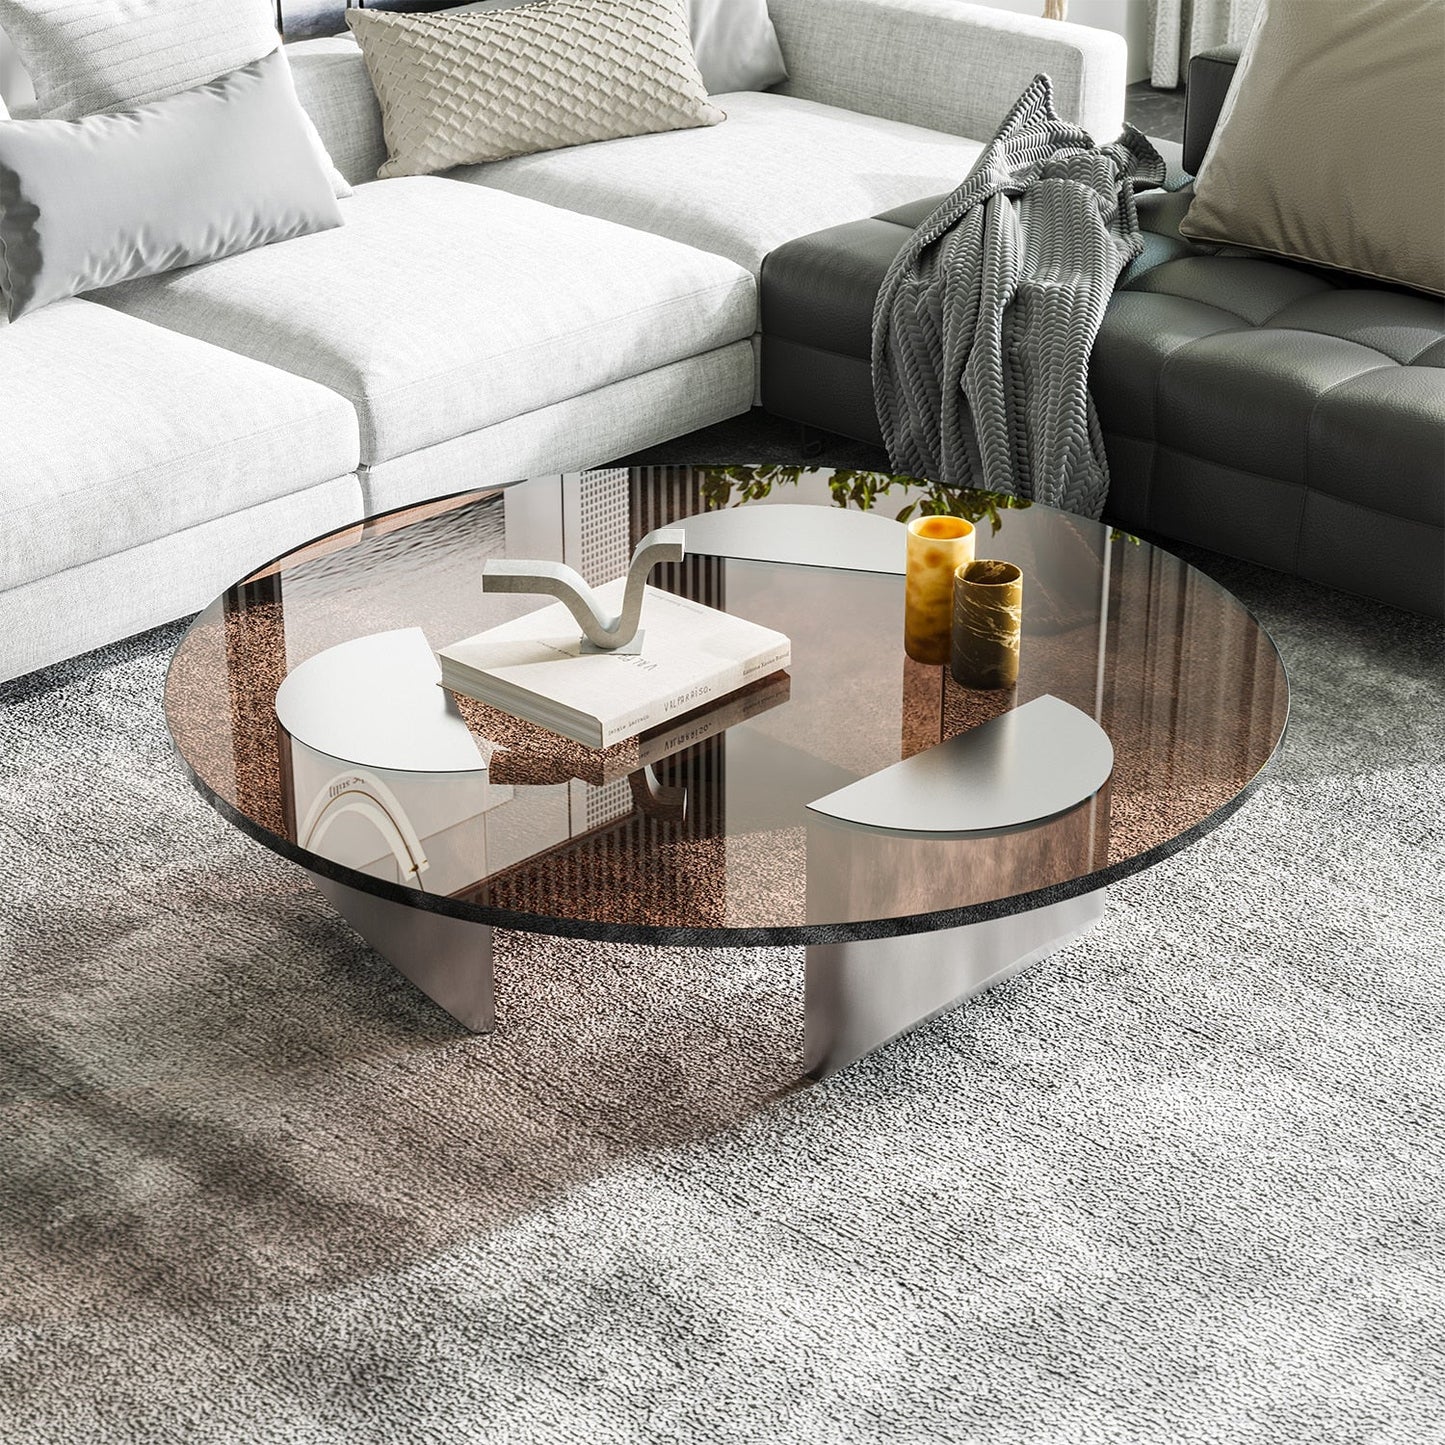 CORX Designs - Minotti Wedge Coffee Table - Review